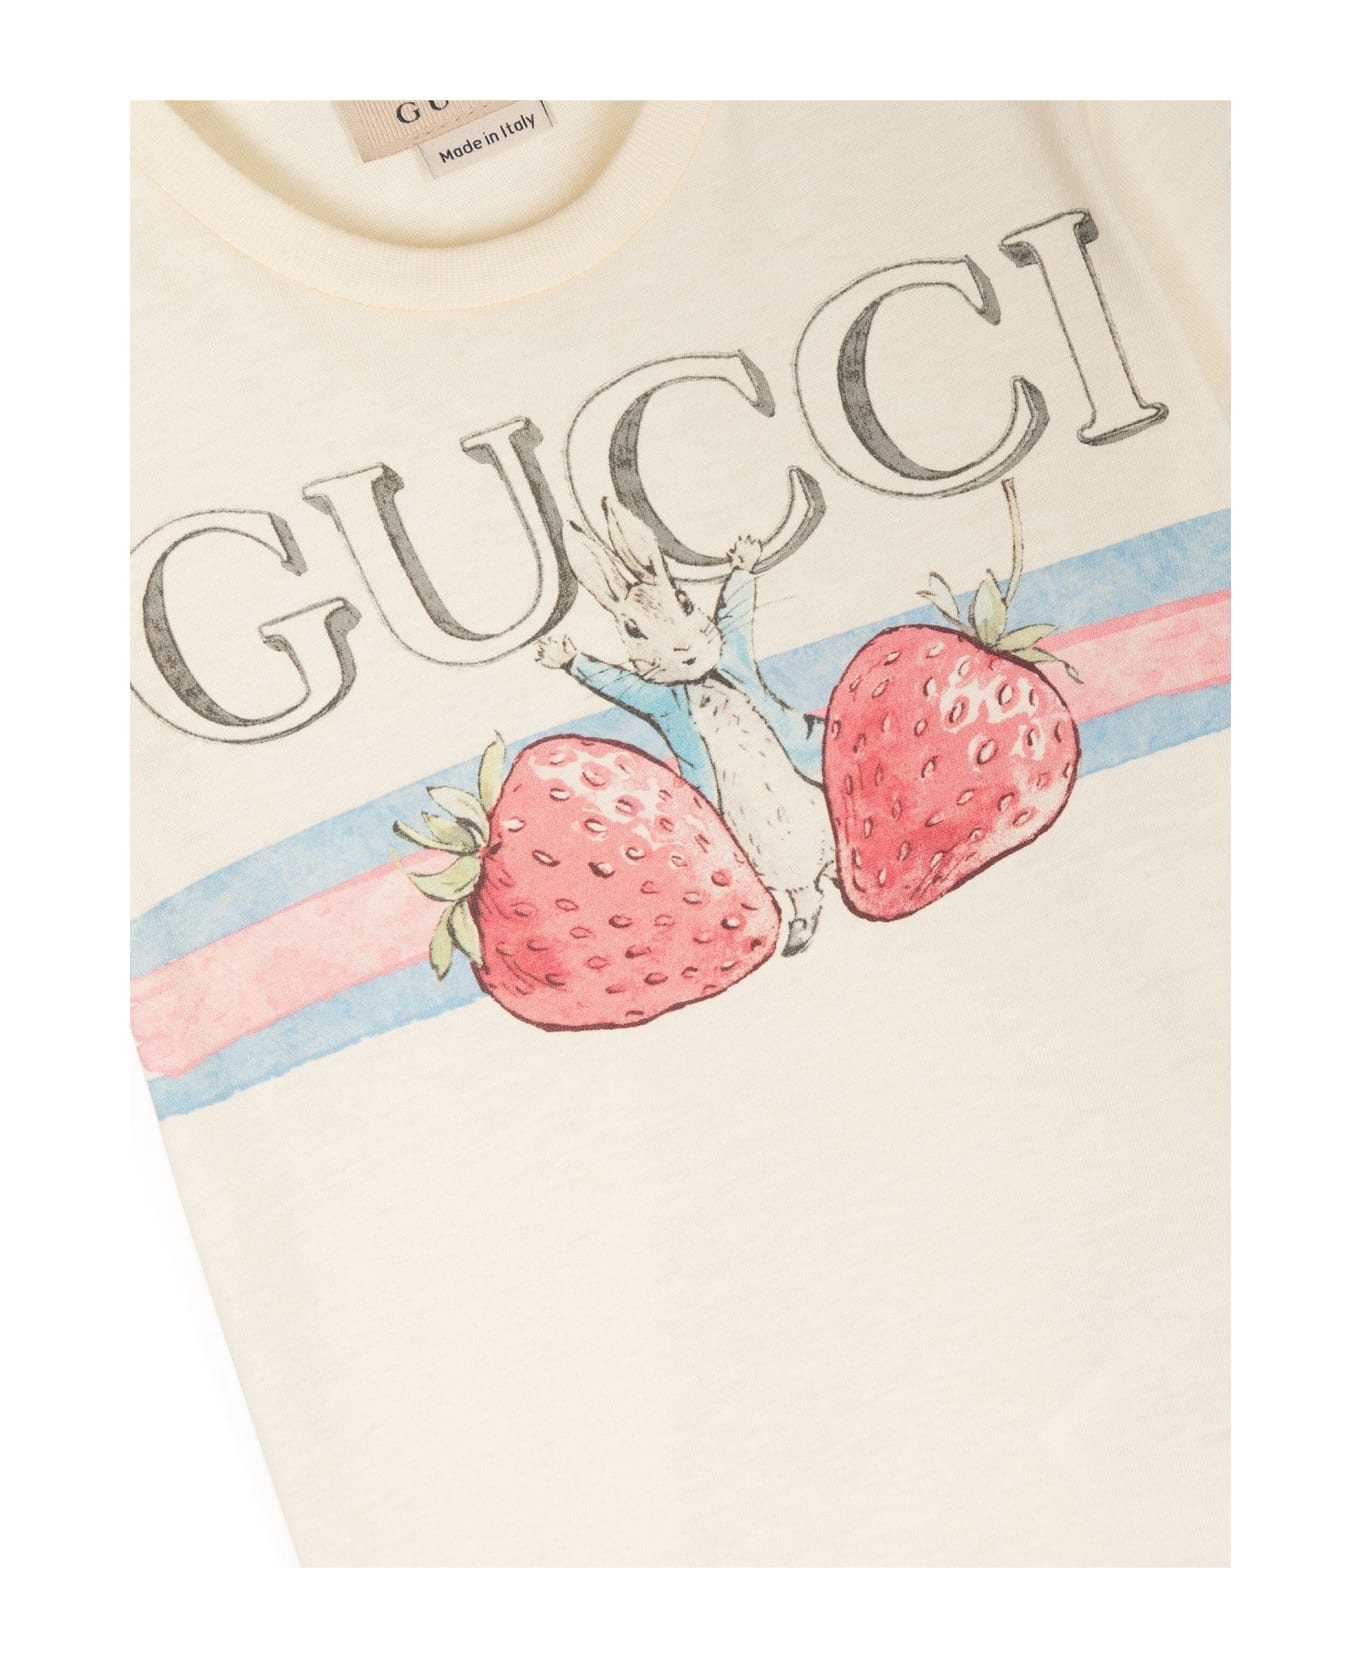 Gucci Kids T-shirts And Polos White - White Tシャツ＆ポロシャツ